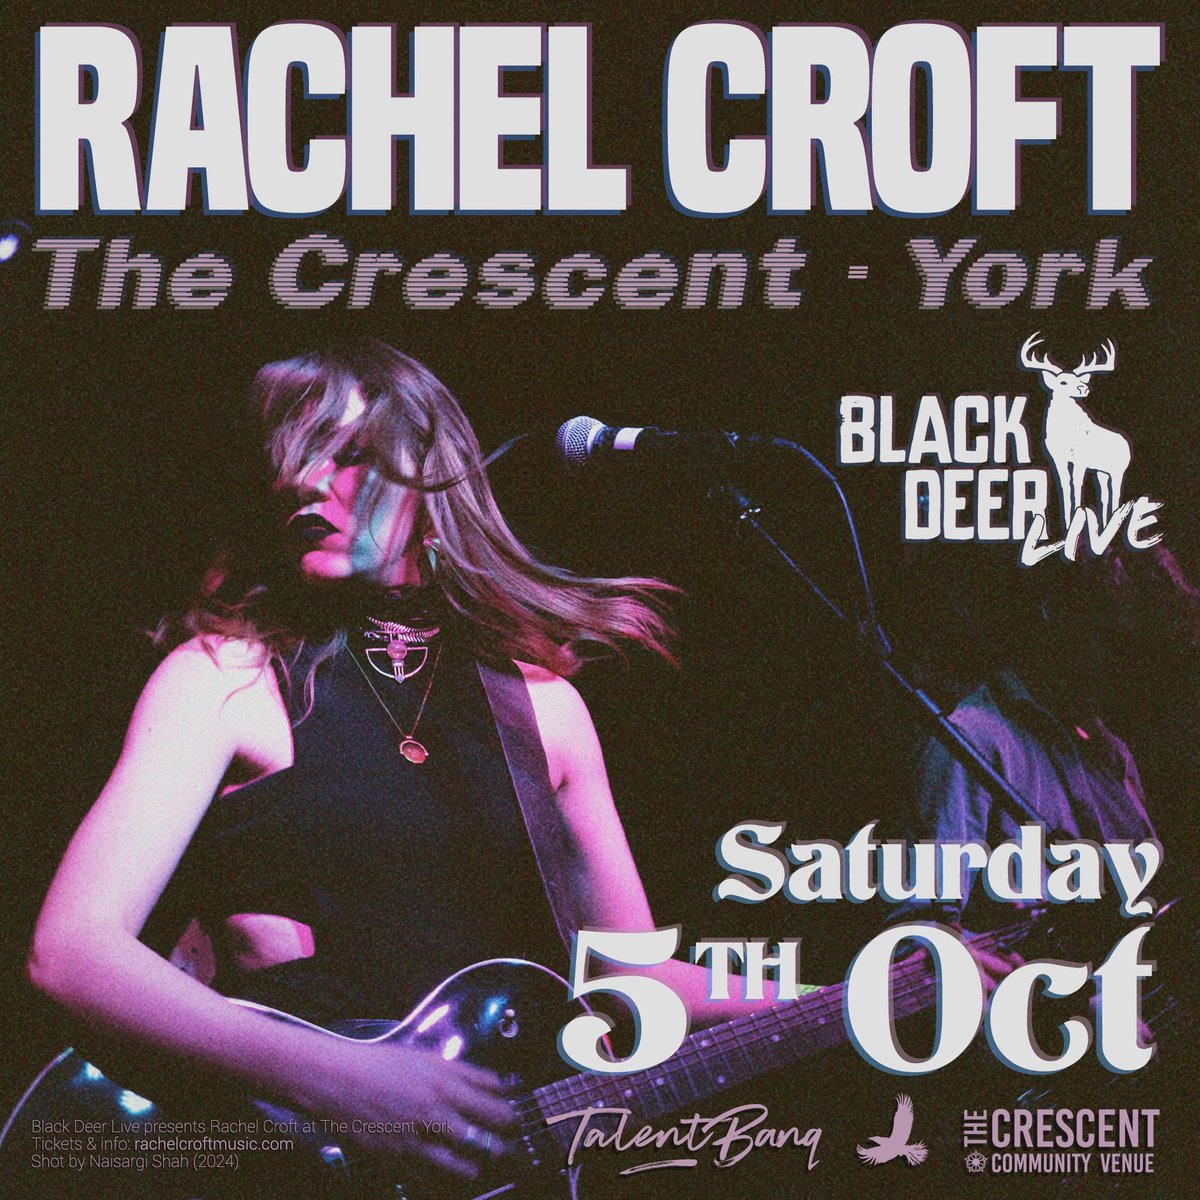 YORK I’M COMING FOR YA - Proud to link up with Black Deer Live for their new series of gigs across the UK ⚡️see you in October! ⚡️ TICKETS: thecrescentyork.seetickets.com/event/rachel-c…